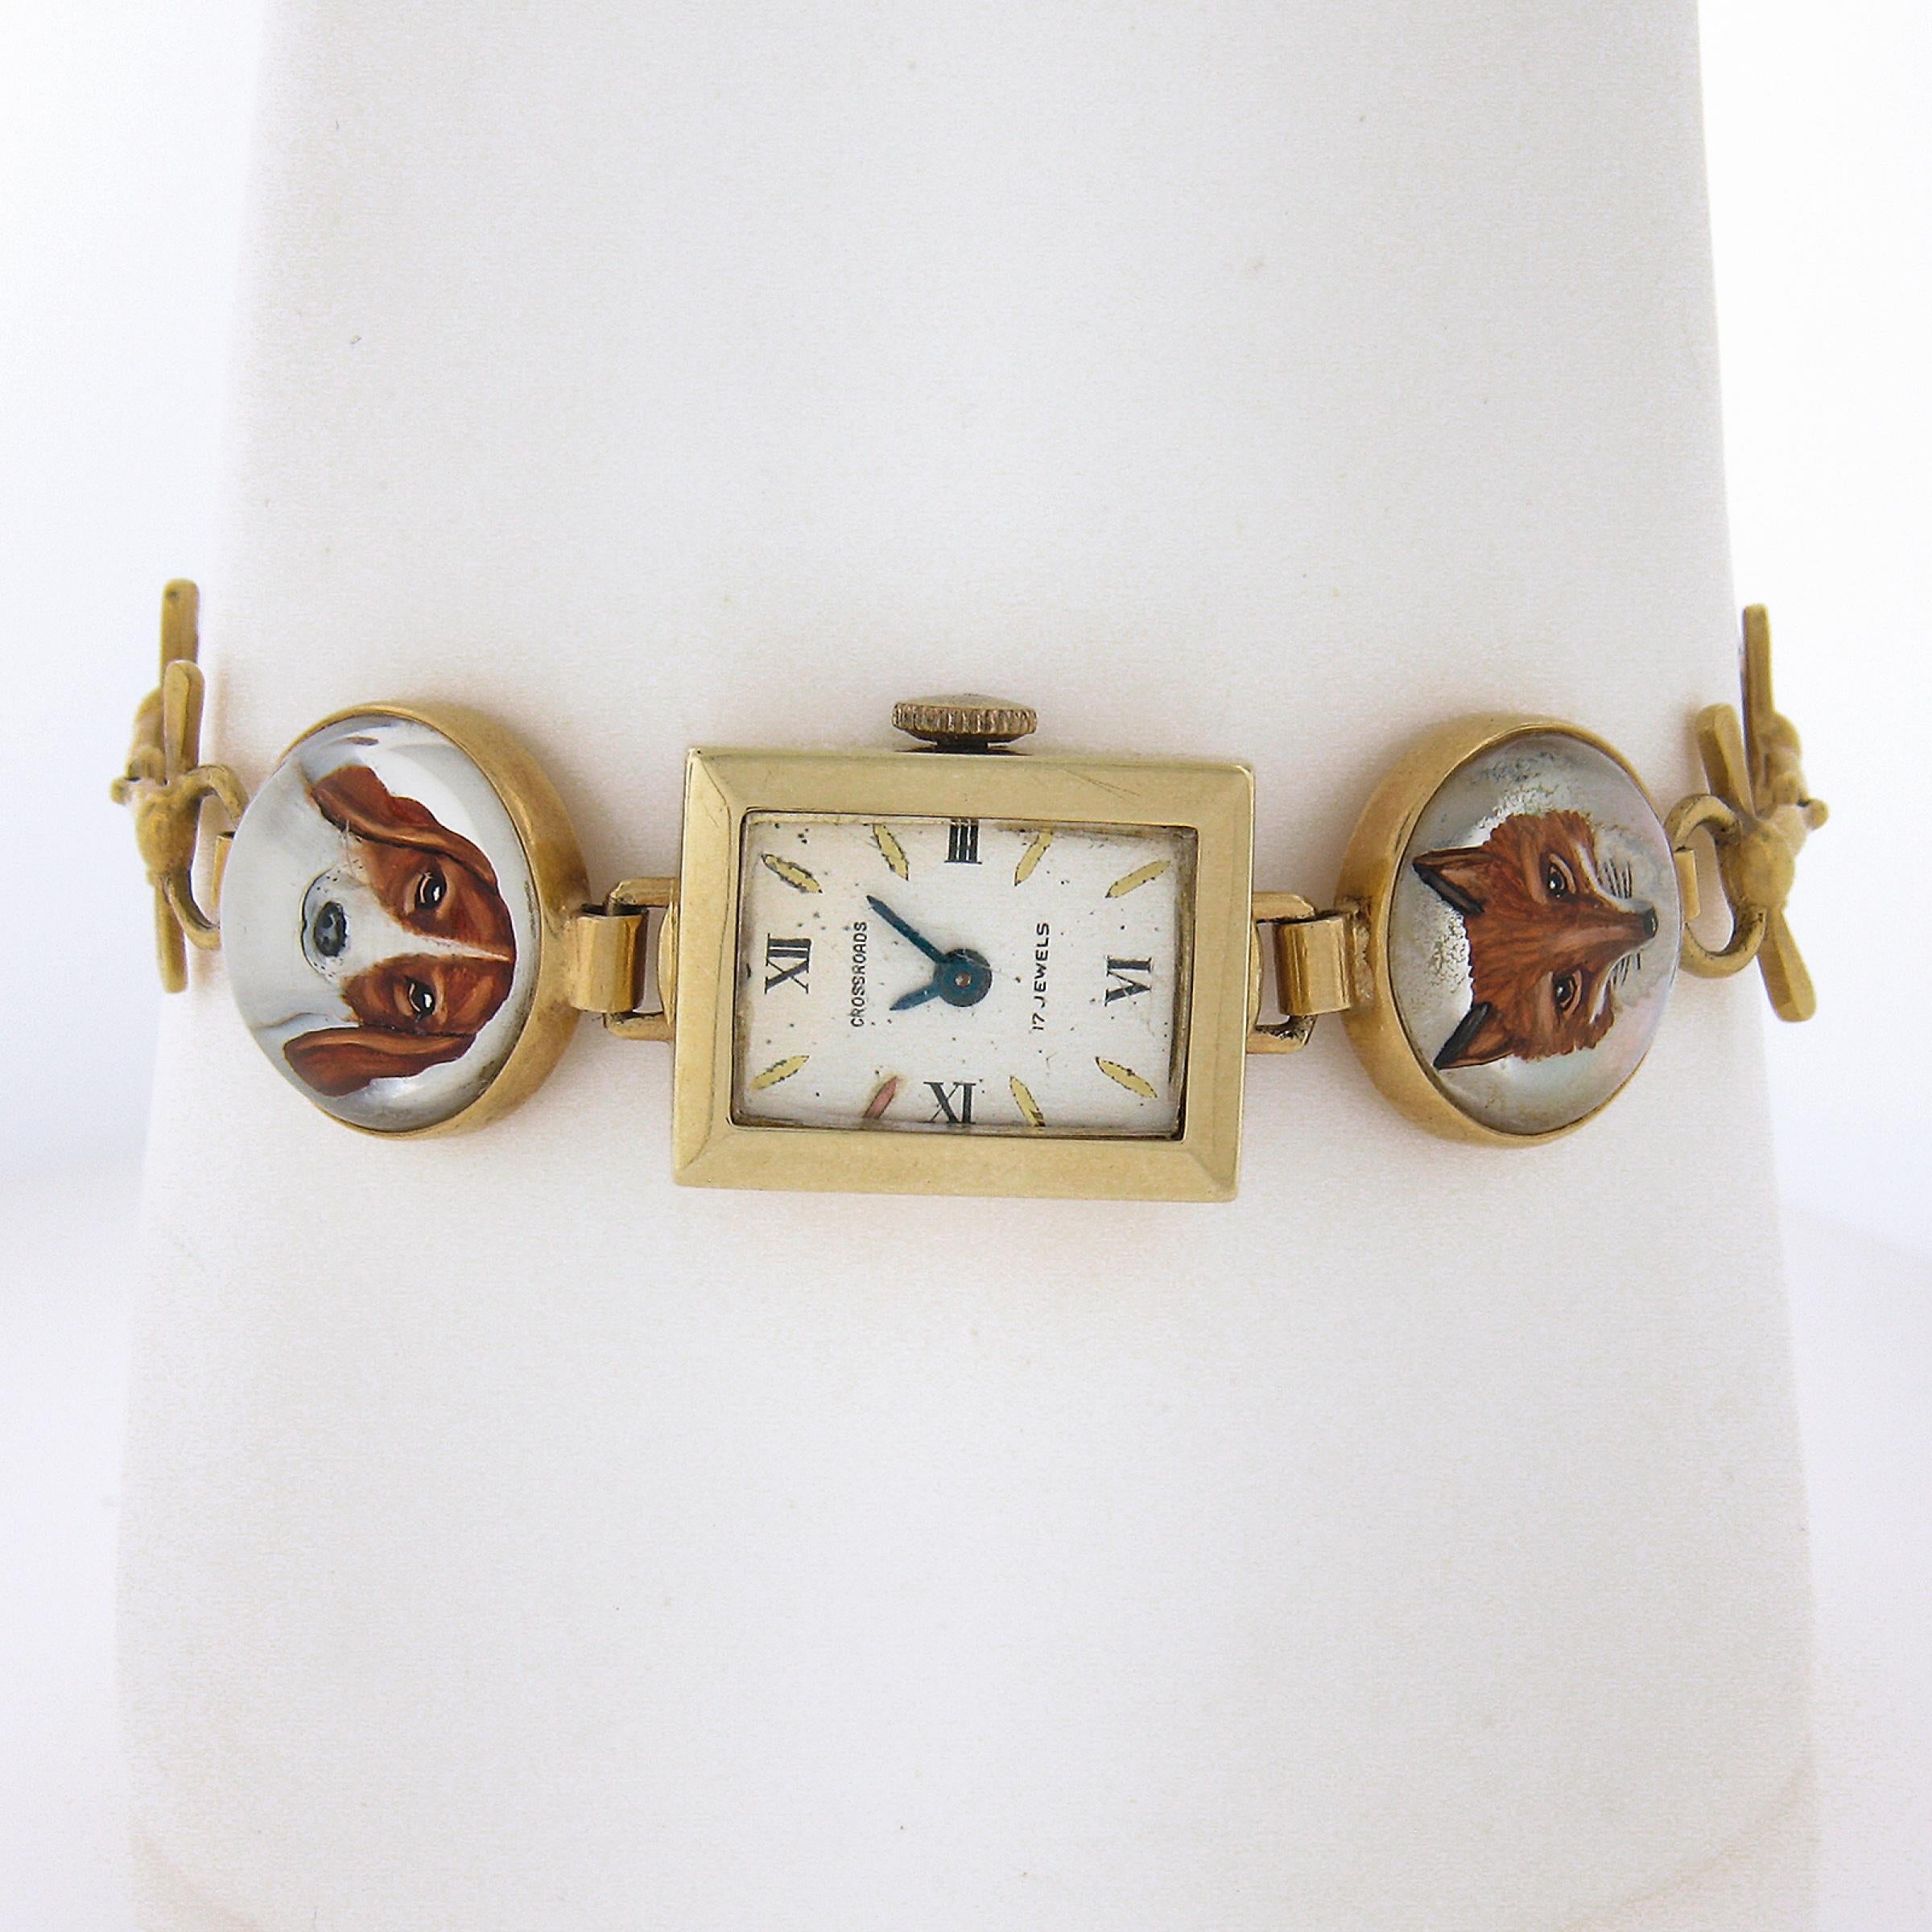 This gorgeous vintage watch bracelet features wonderful portraits of a dog, fox and a jockey riding a horse done in a reversed intaglio technique. The bracelet also features a Swiss made, mechanical hand winding watch that is working and keeping